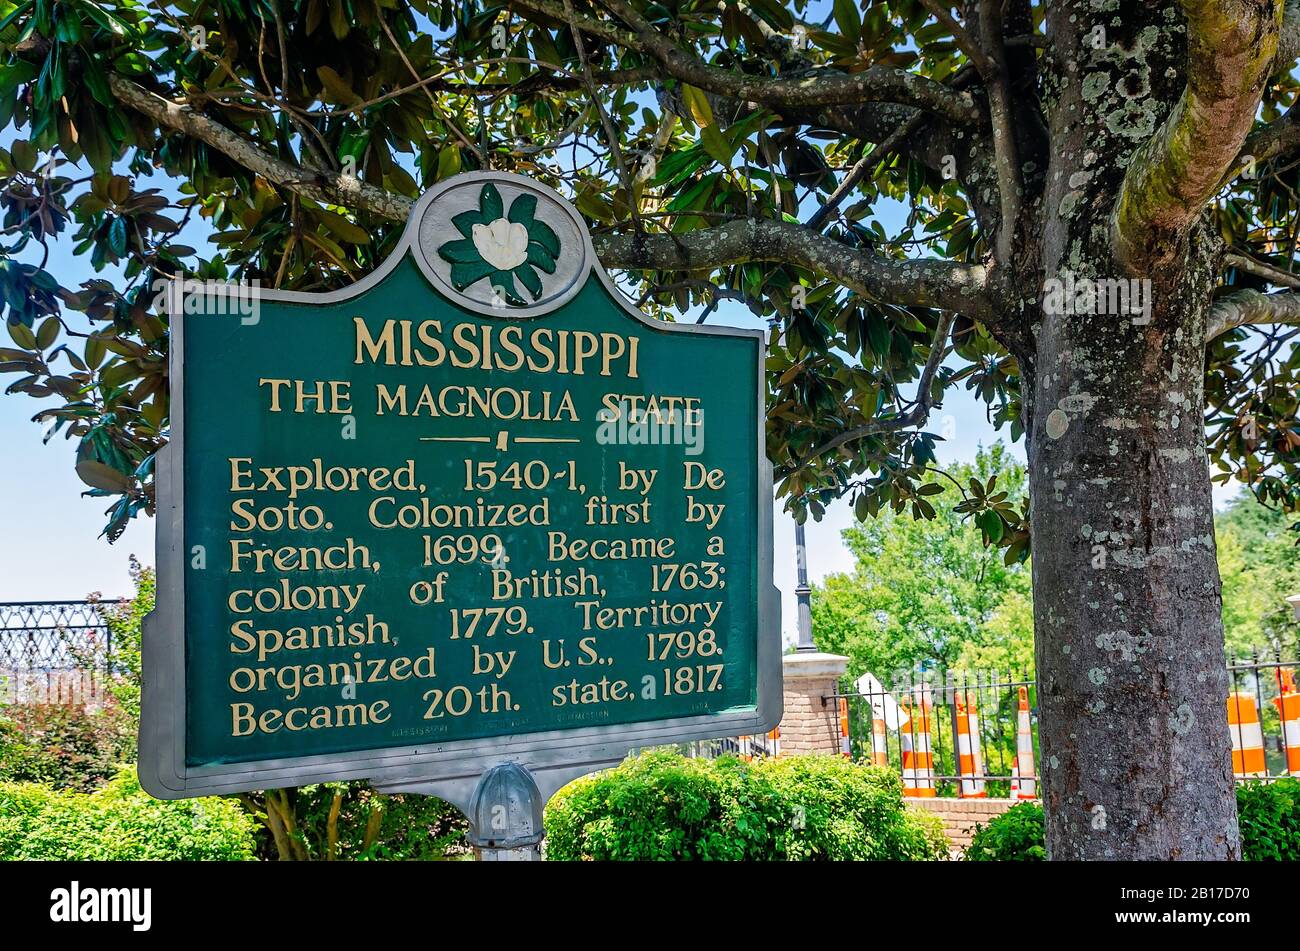 A Historic Marker Beneath A Magnolia Tree Details The History Of Mississippi The Magnolia State At The Welcome Center In Vicksburg Mississippi Stock Photo Alamy